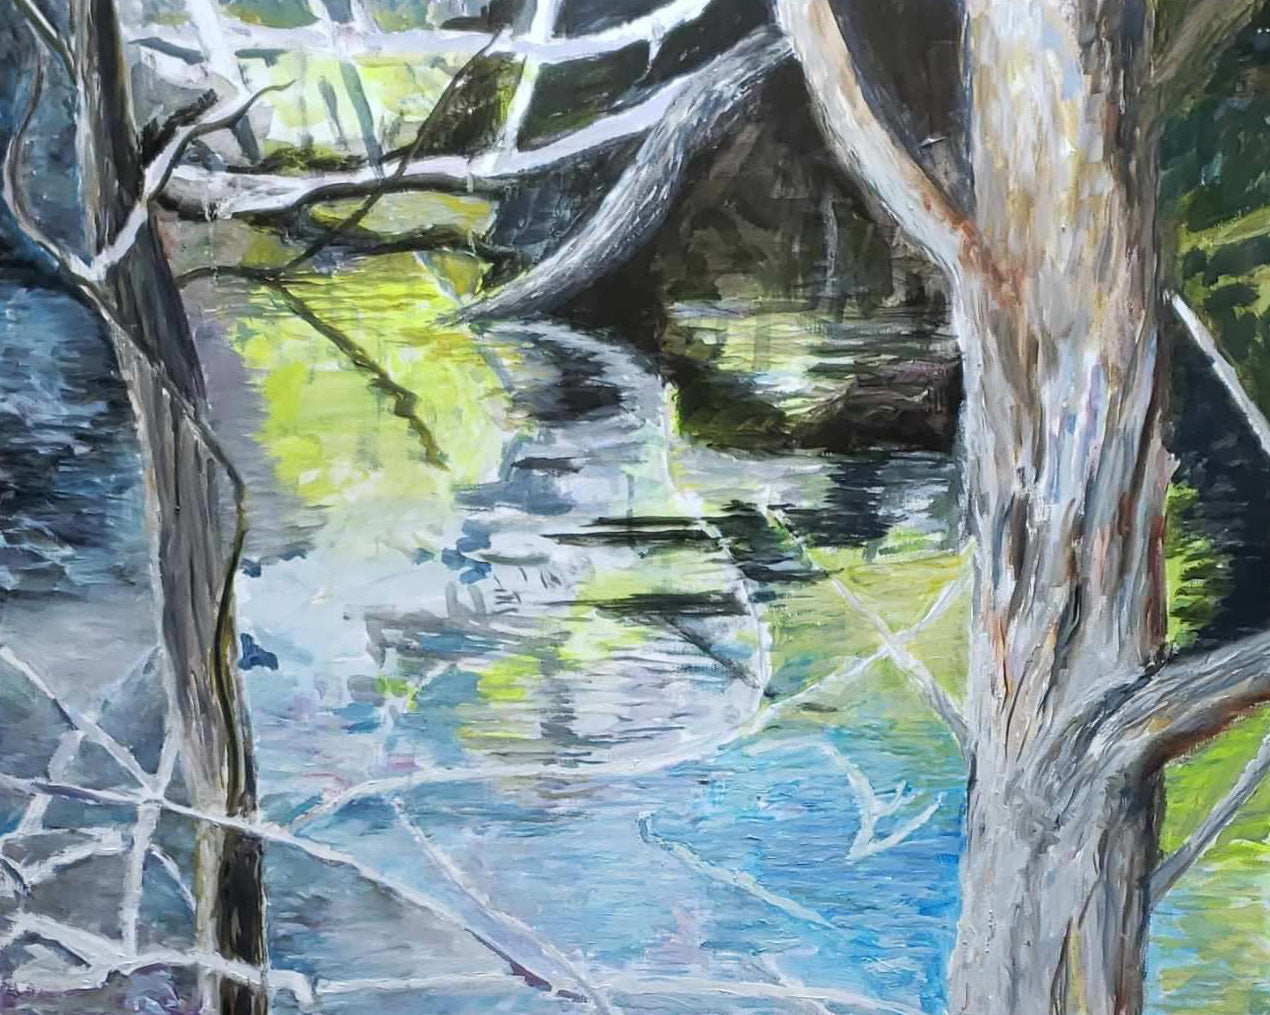 River in the Woods - Rick Frisbie